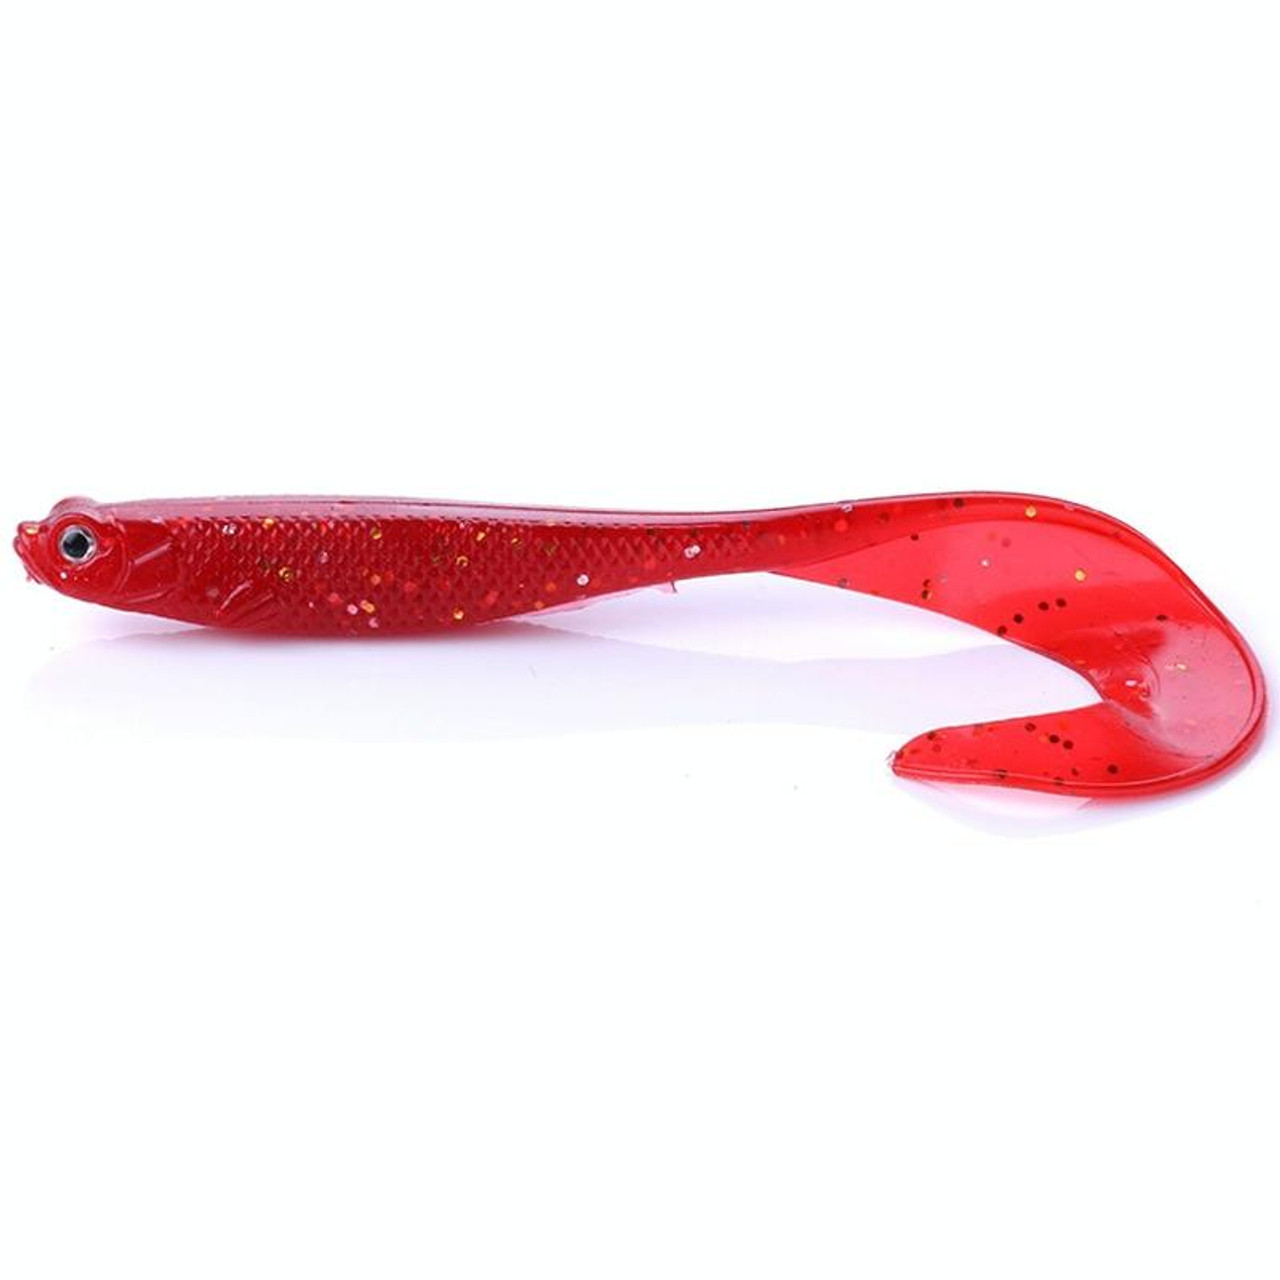 5pcs Roadrunner Soft Lures Leadheads Luminous Lures(Red White T Tail)